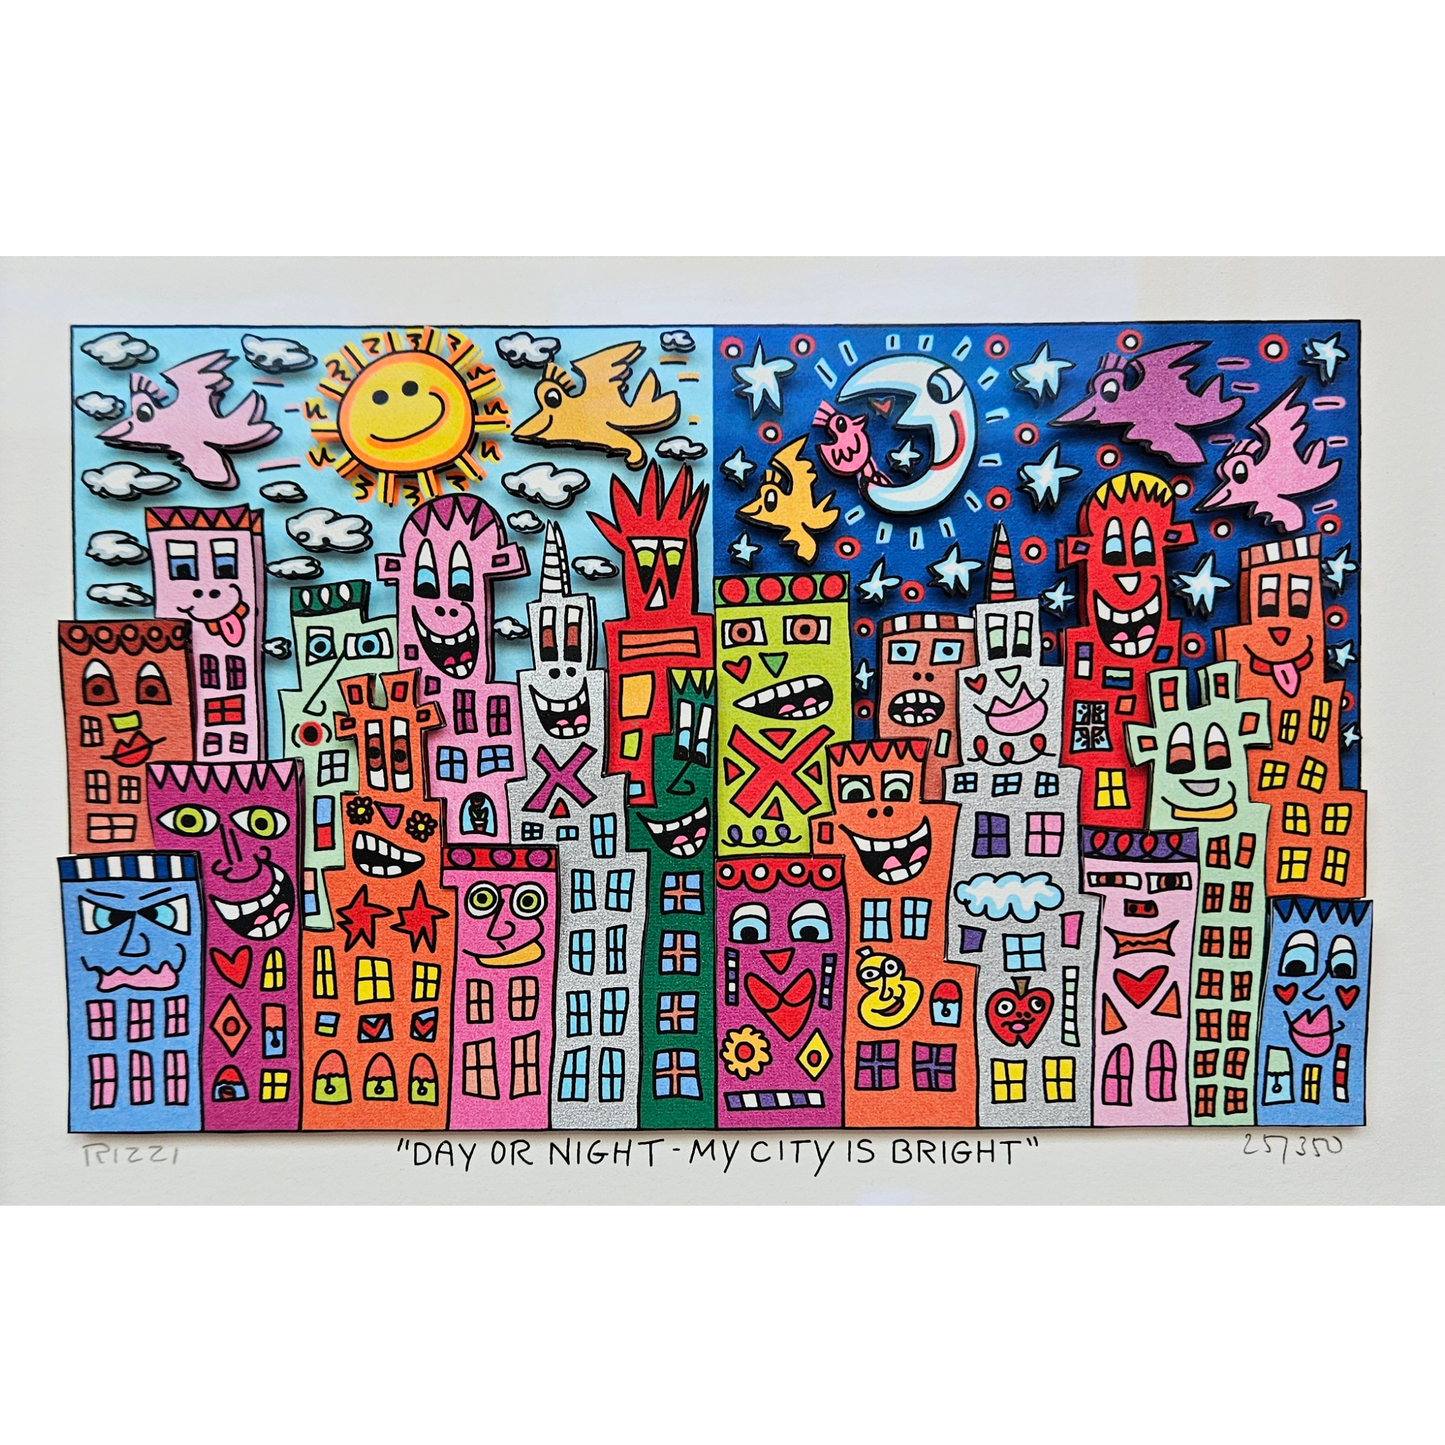 James Rizzi - Day or Night - My City Is Bright (2019)